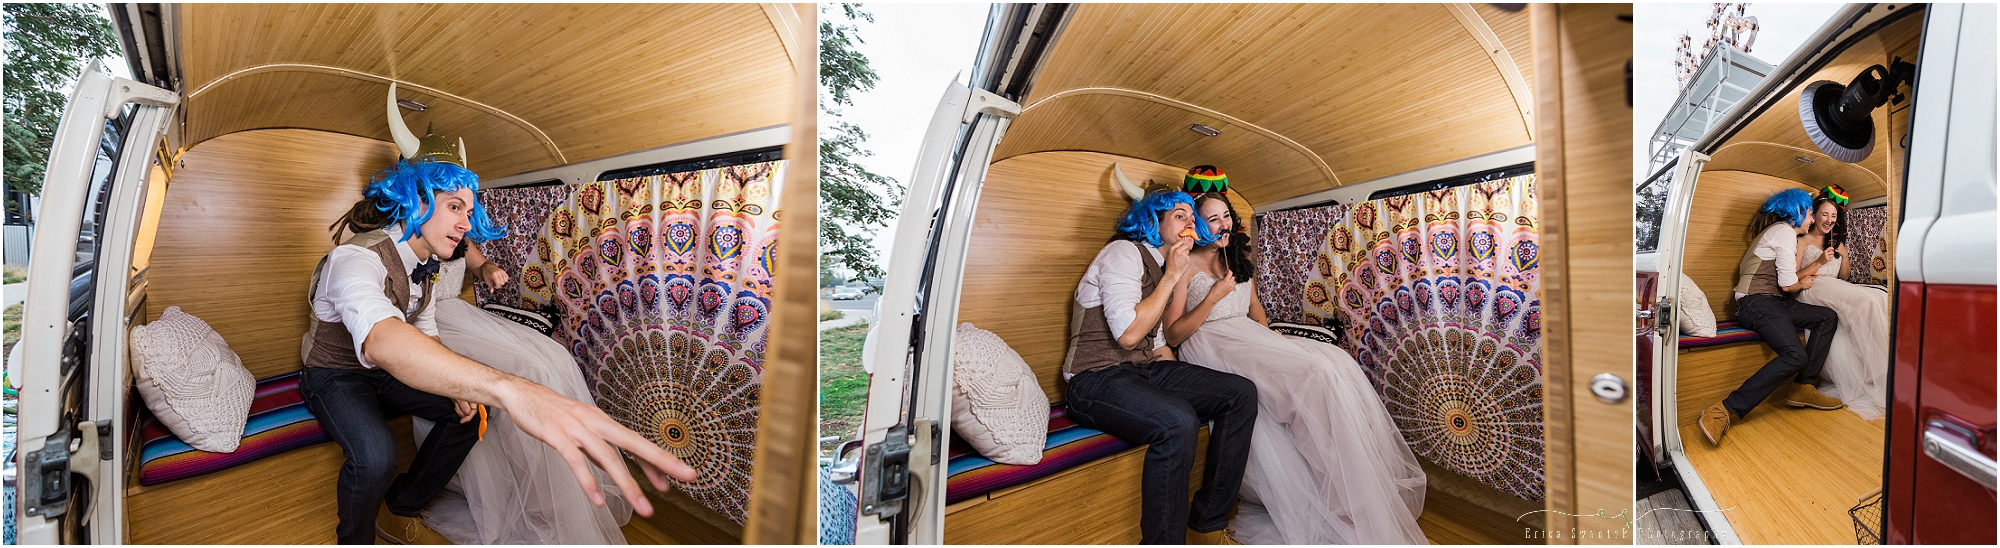 Viking helmets and blue hair look good on this groom as he poses with his bride in the Bend VW Photo Bus Booth parked outside his Worthy Brewing Wedding in Bend Oregon. | Erica Swantek Photography